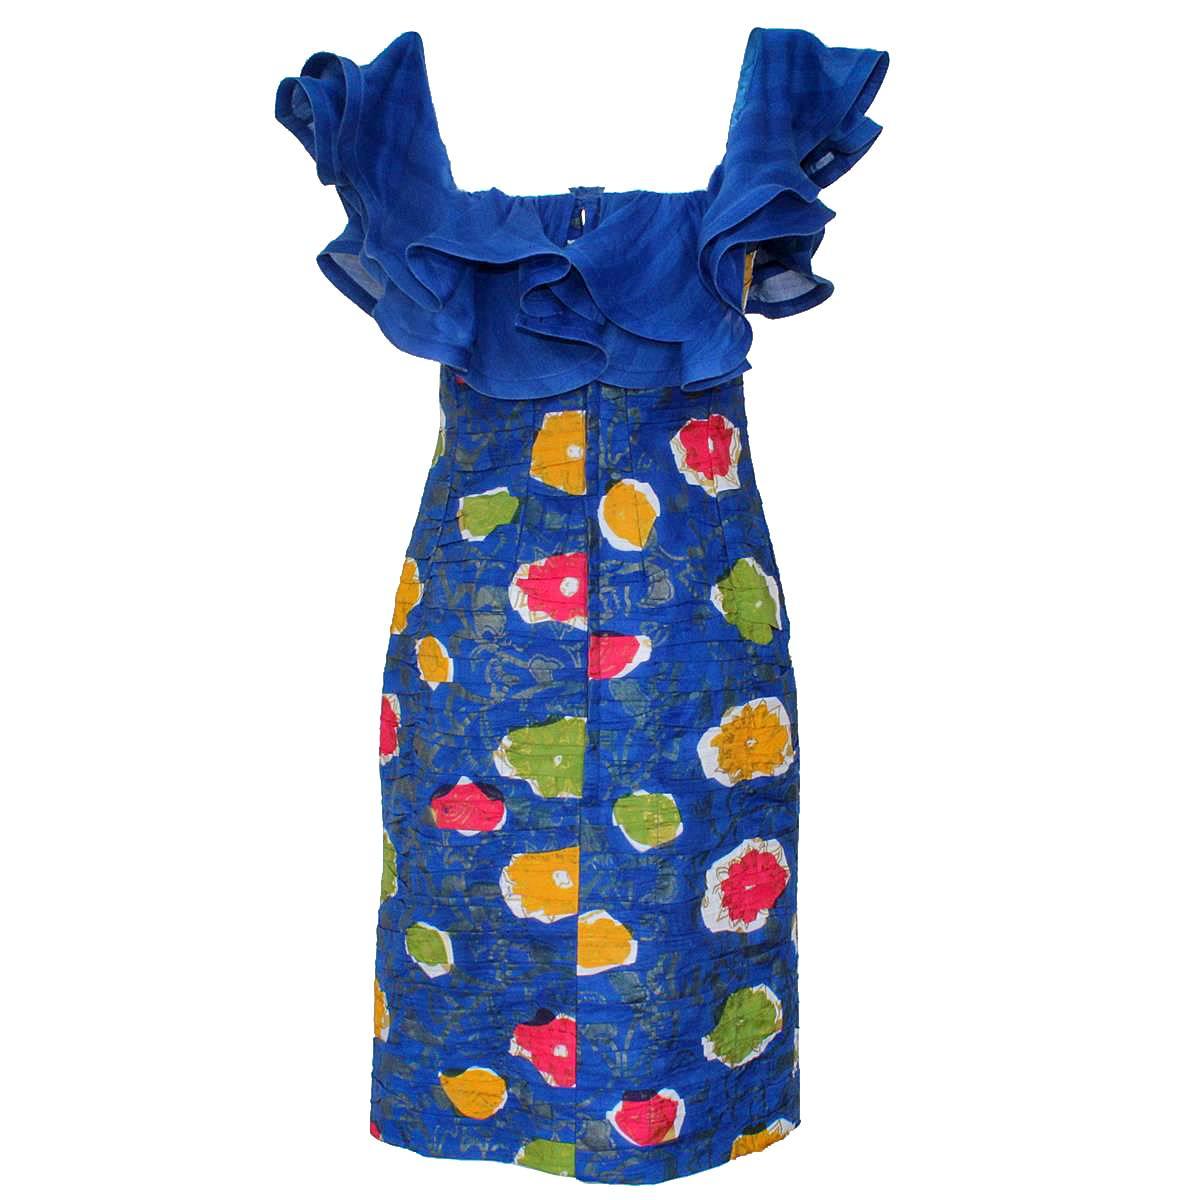 Beautiful colors for this vintage dress
Livio de Simone Capri, Italy
Cotton
Multicolored pattern on blue base
Total lenght from shoulder cm 90 (35.4 inches)
Size italian 42 (US 8)
Made in Italy
Worldwide express shipping included in the price